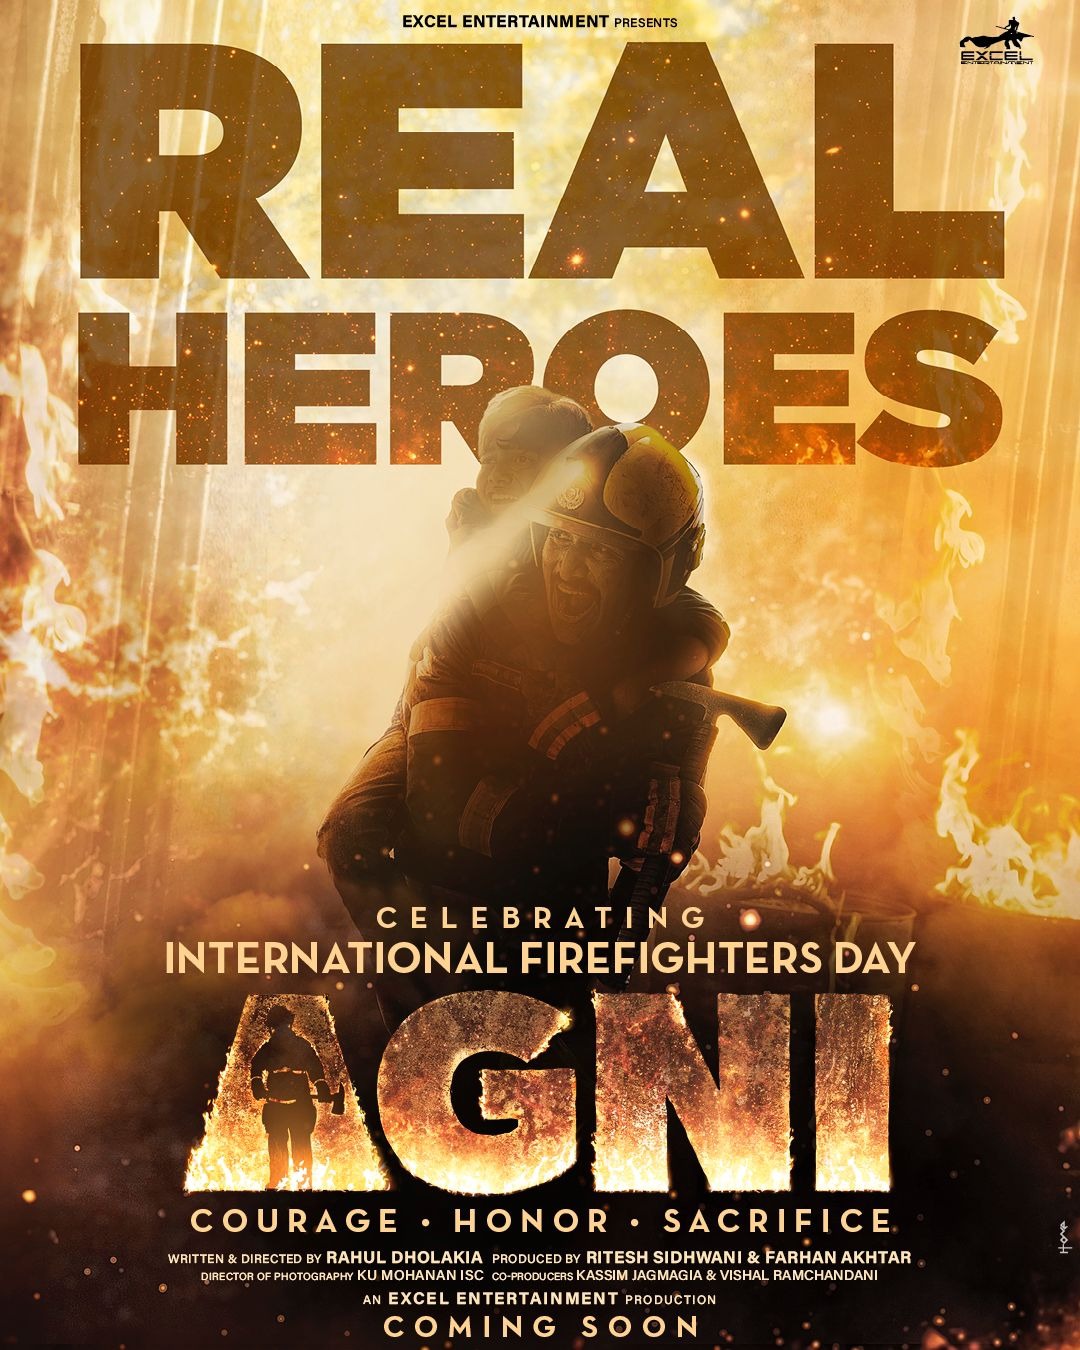 Excel Entertainment releases special poster of 'Agni' on International Firefighters Day